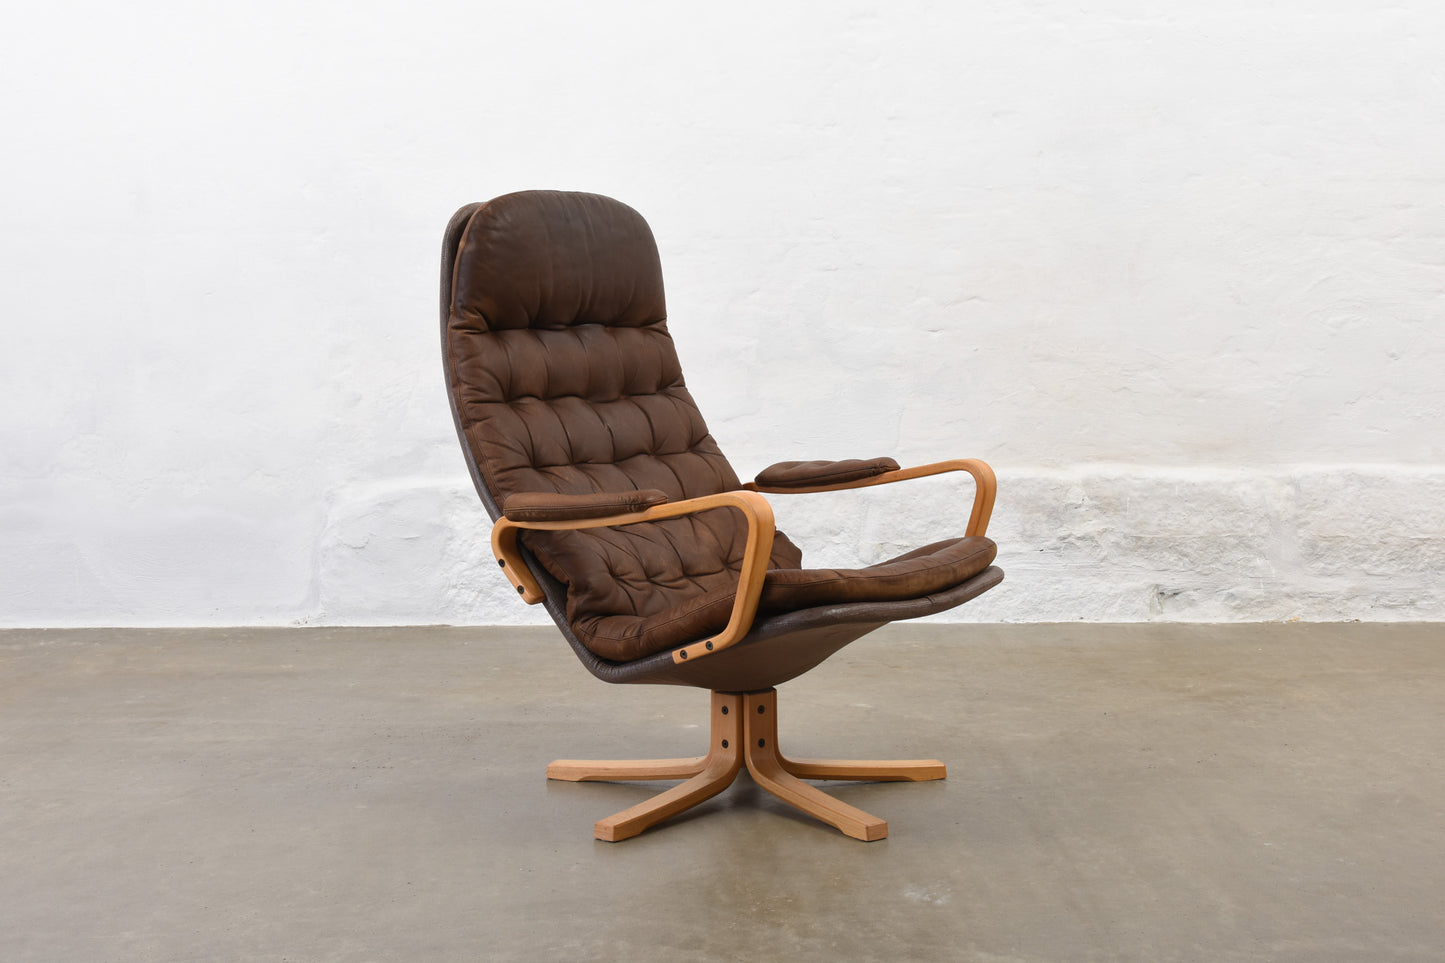 1960s leather swivel chair by Sam Larsson